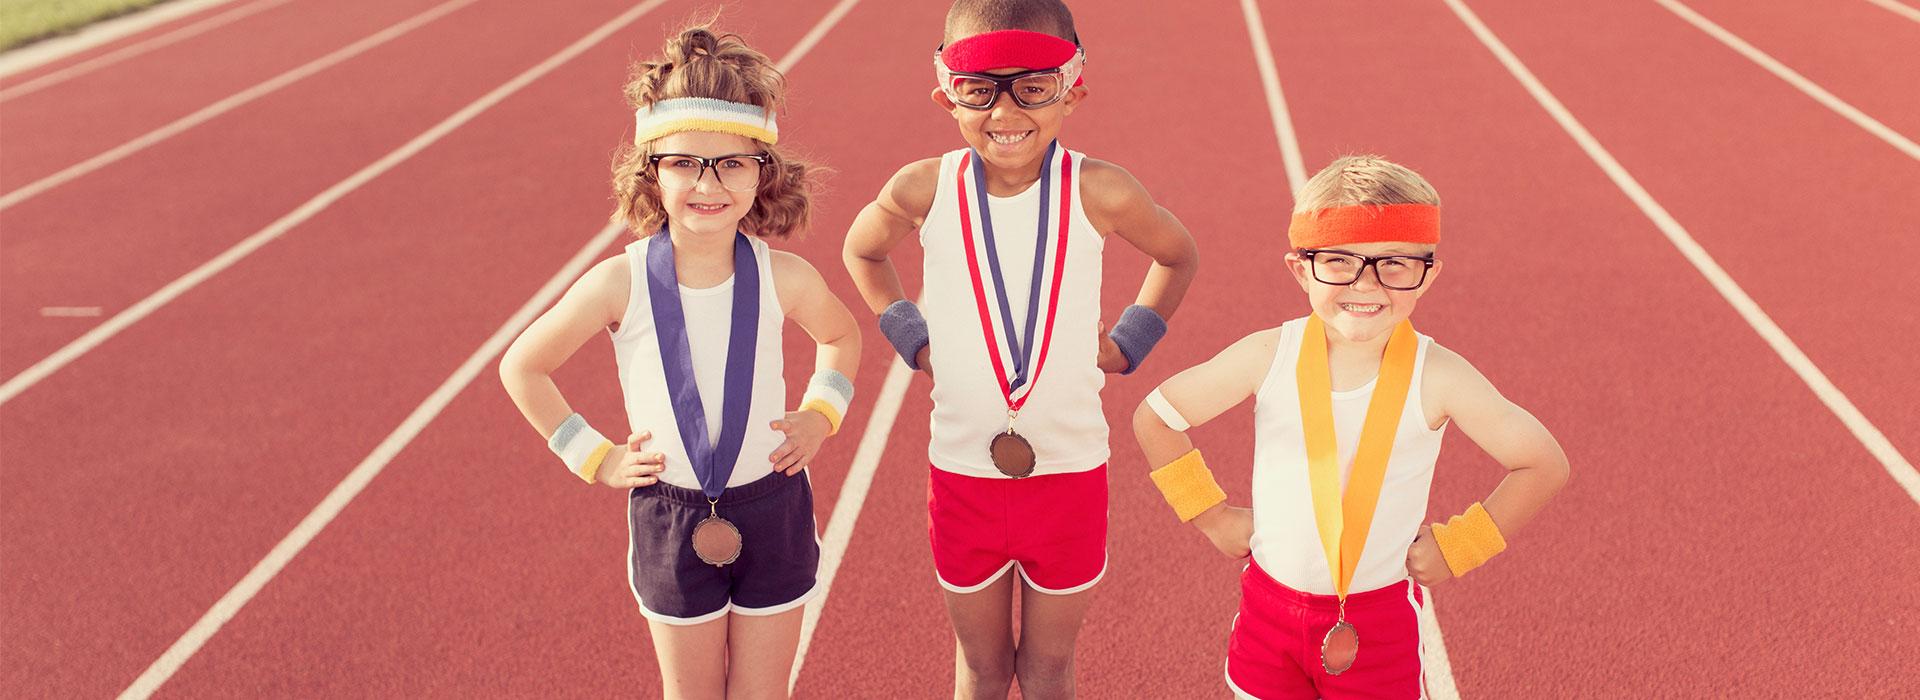 Three kids in retro athletic wear, headbands and sweatbands showing off their championship medals on a track.